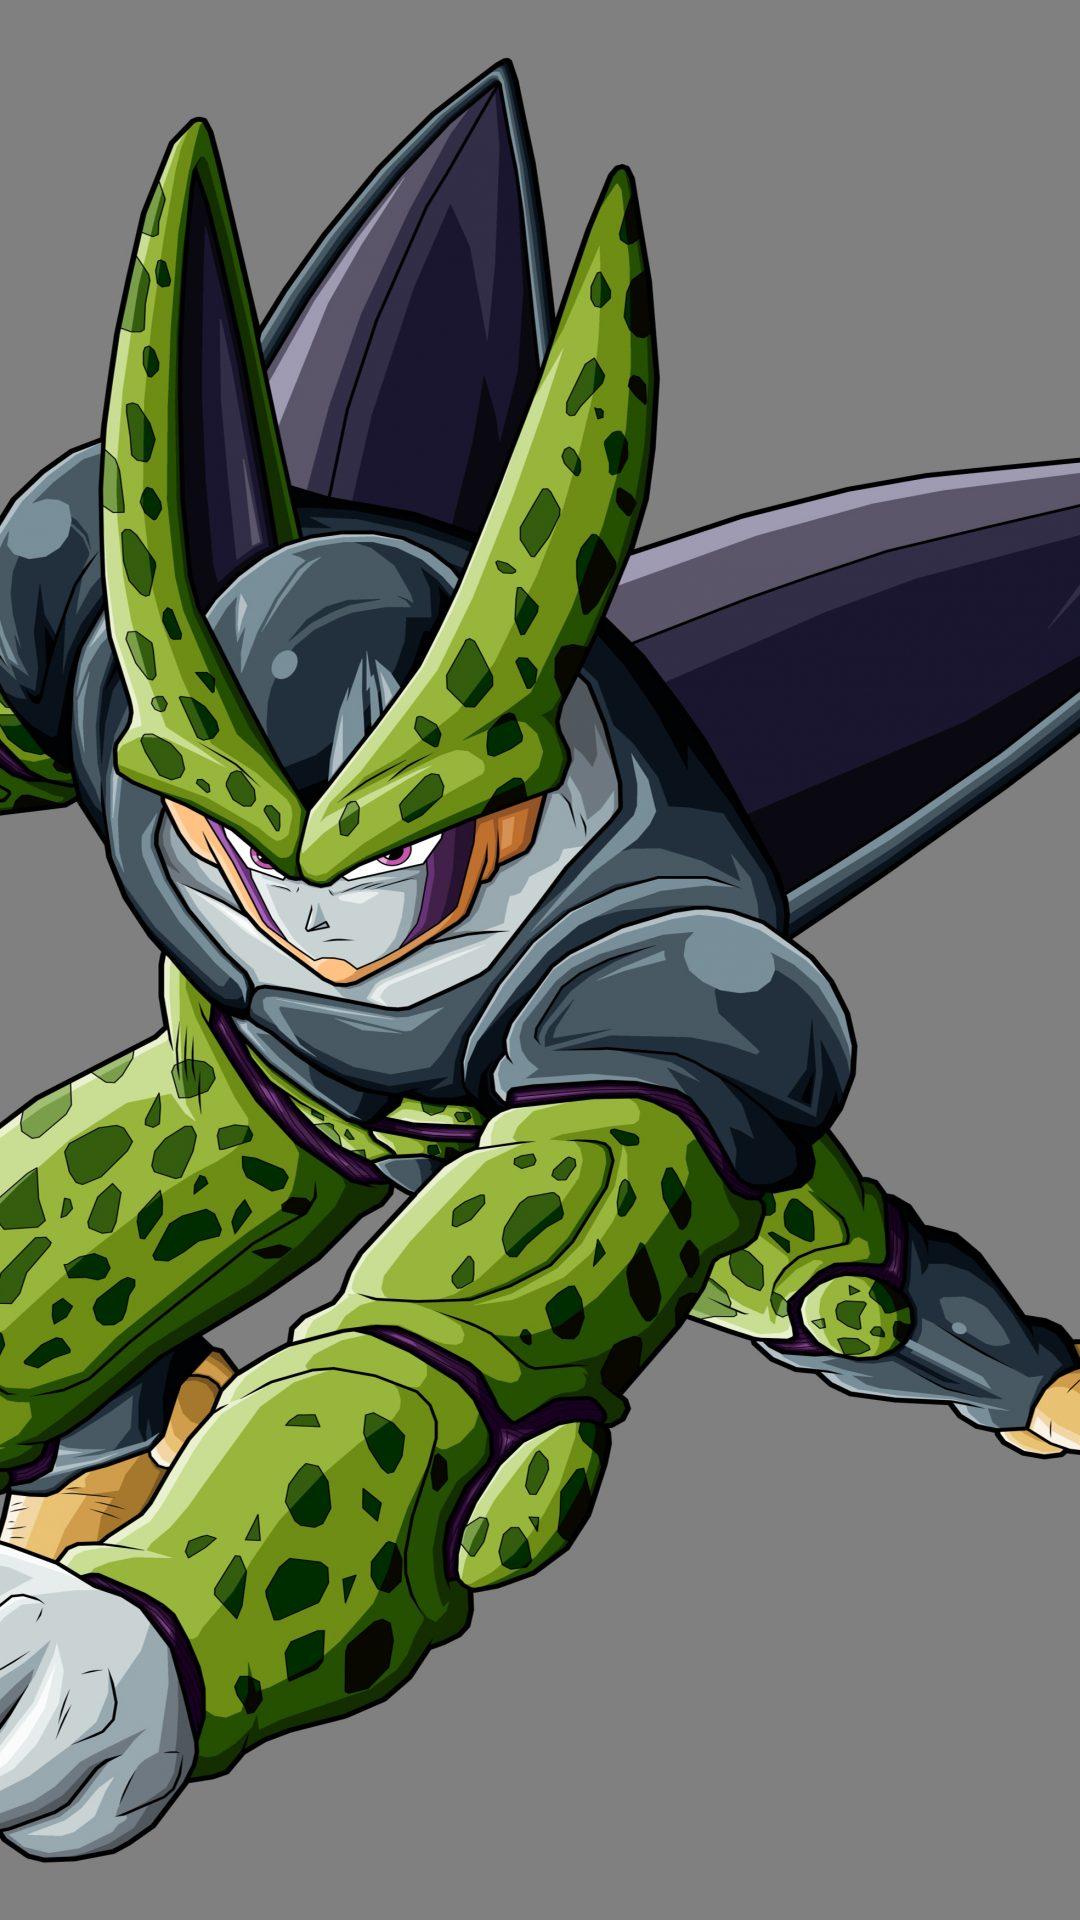 60+ Cell (Dragon Ball) HD Wallpapers and Backgrounds